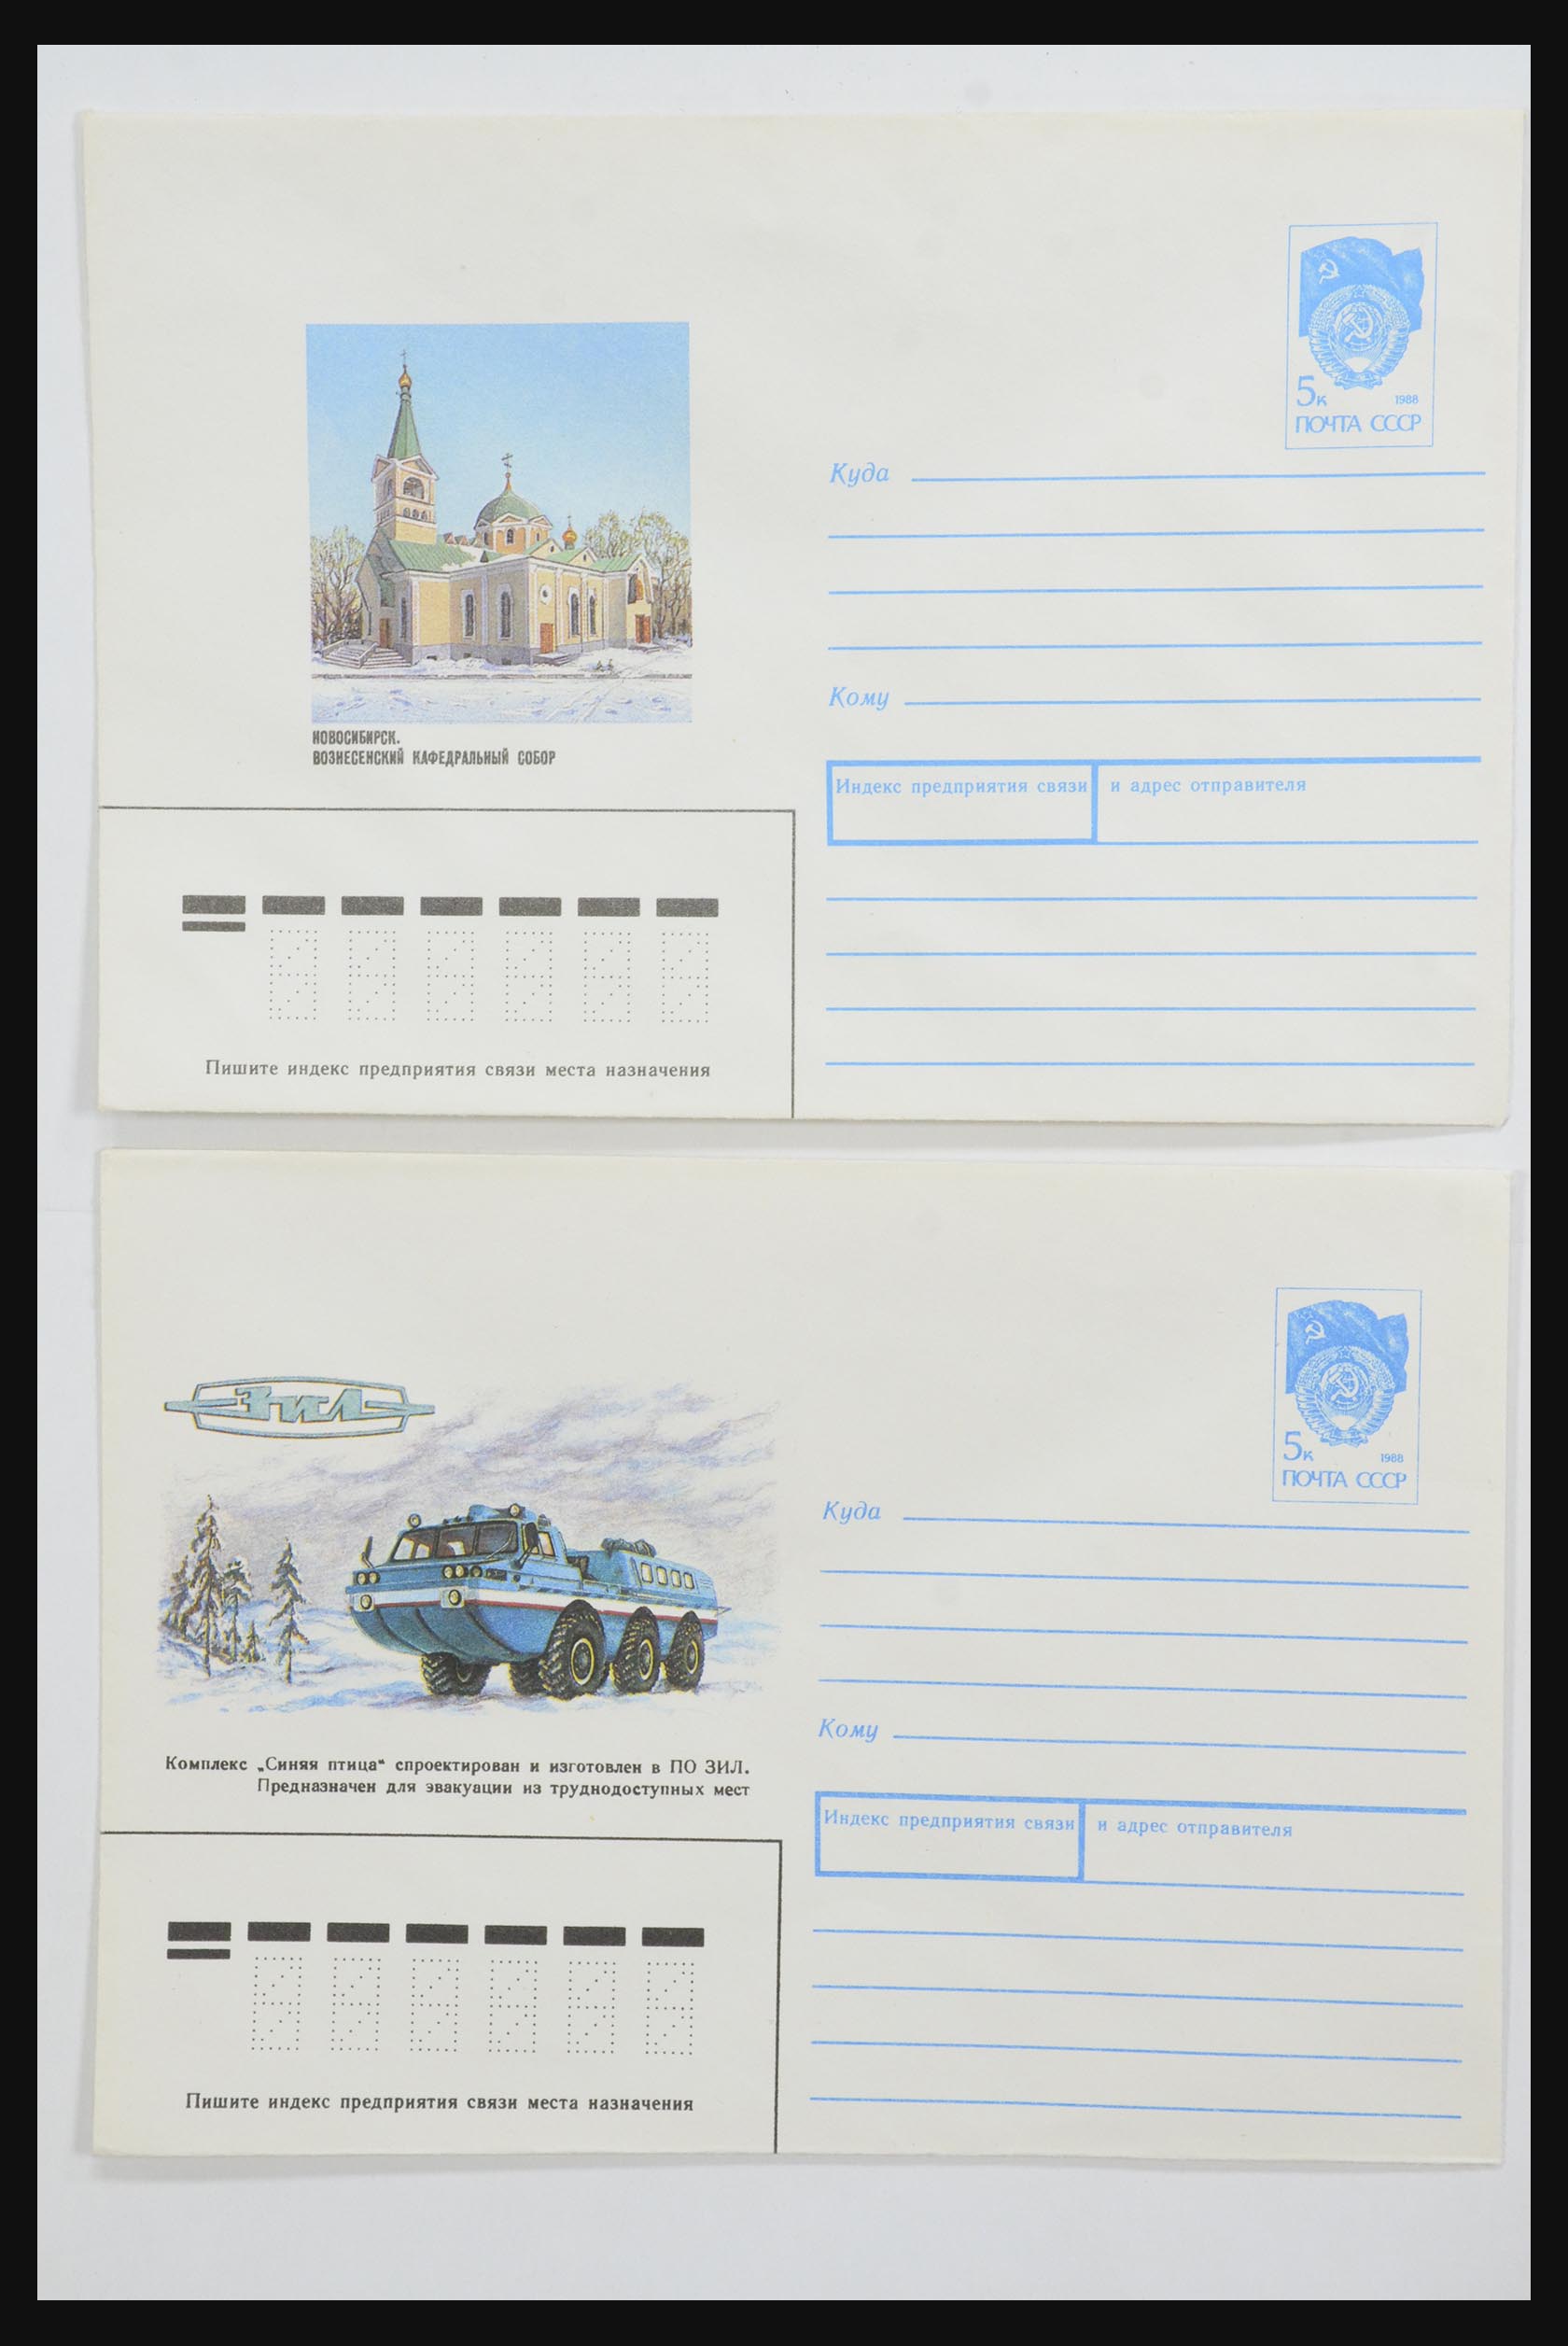 31928 0095 - 31928 Eastern Europe covers 1960's-1990's.